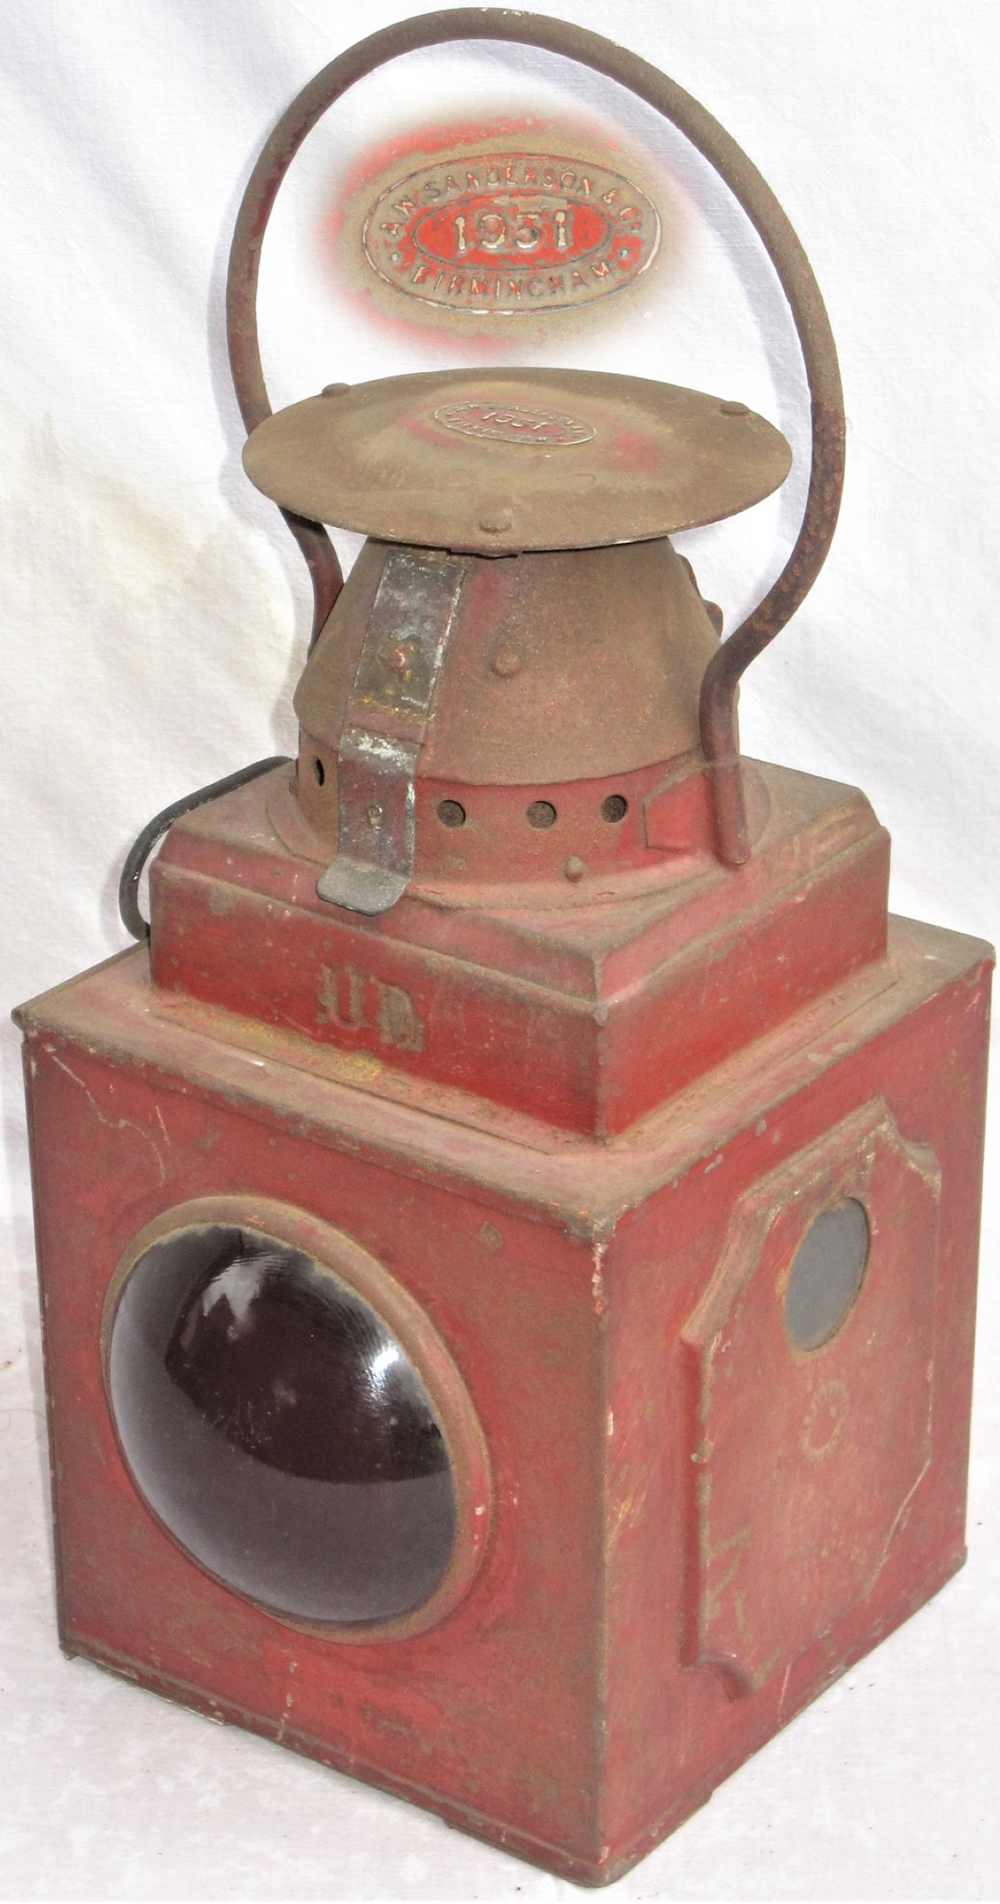 A Locomotive TAIL LAMP probably used on an industrial locomotive made by Sanderson & Co in